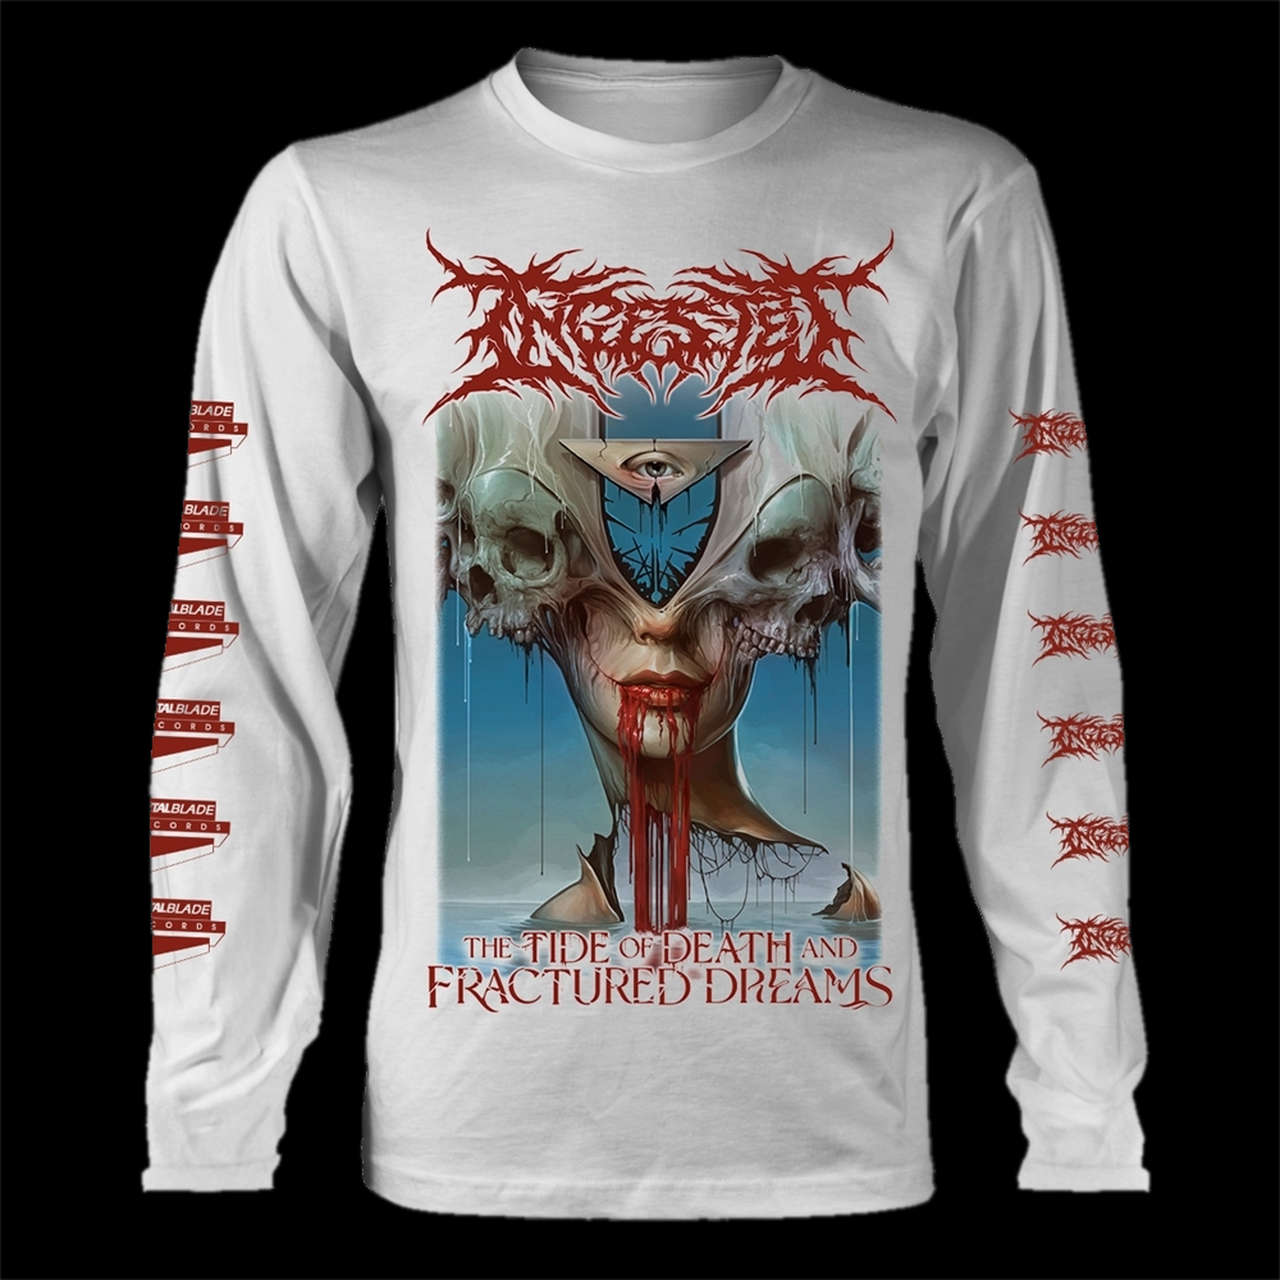 Ingested - The Tide of Death and Fractured Dreams (White) (Long Sleeve T-Shirt)